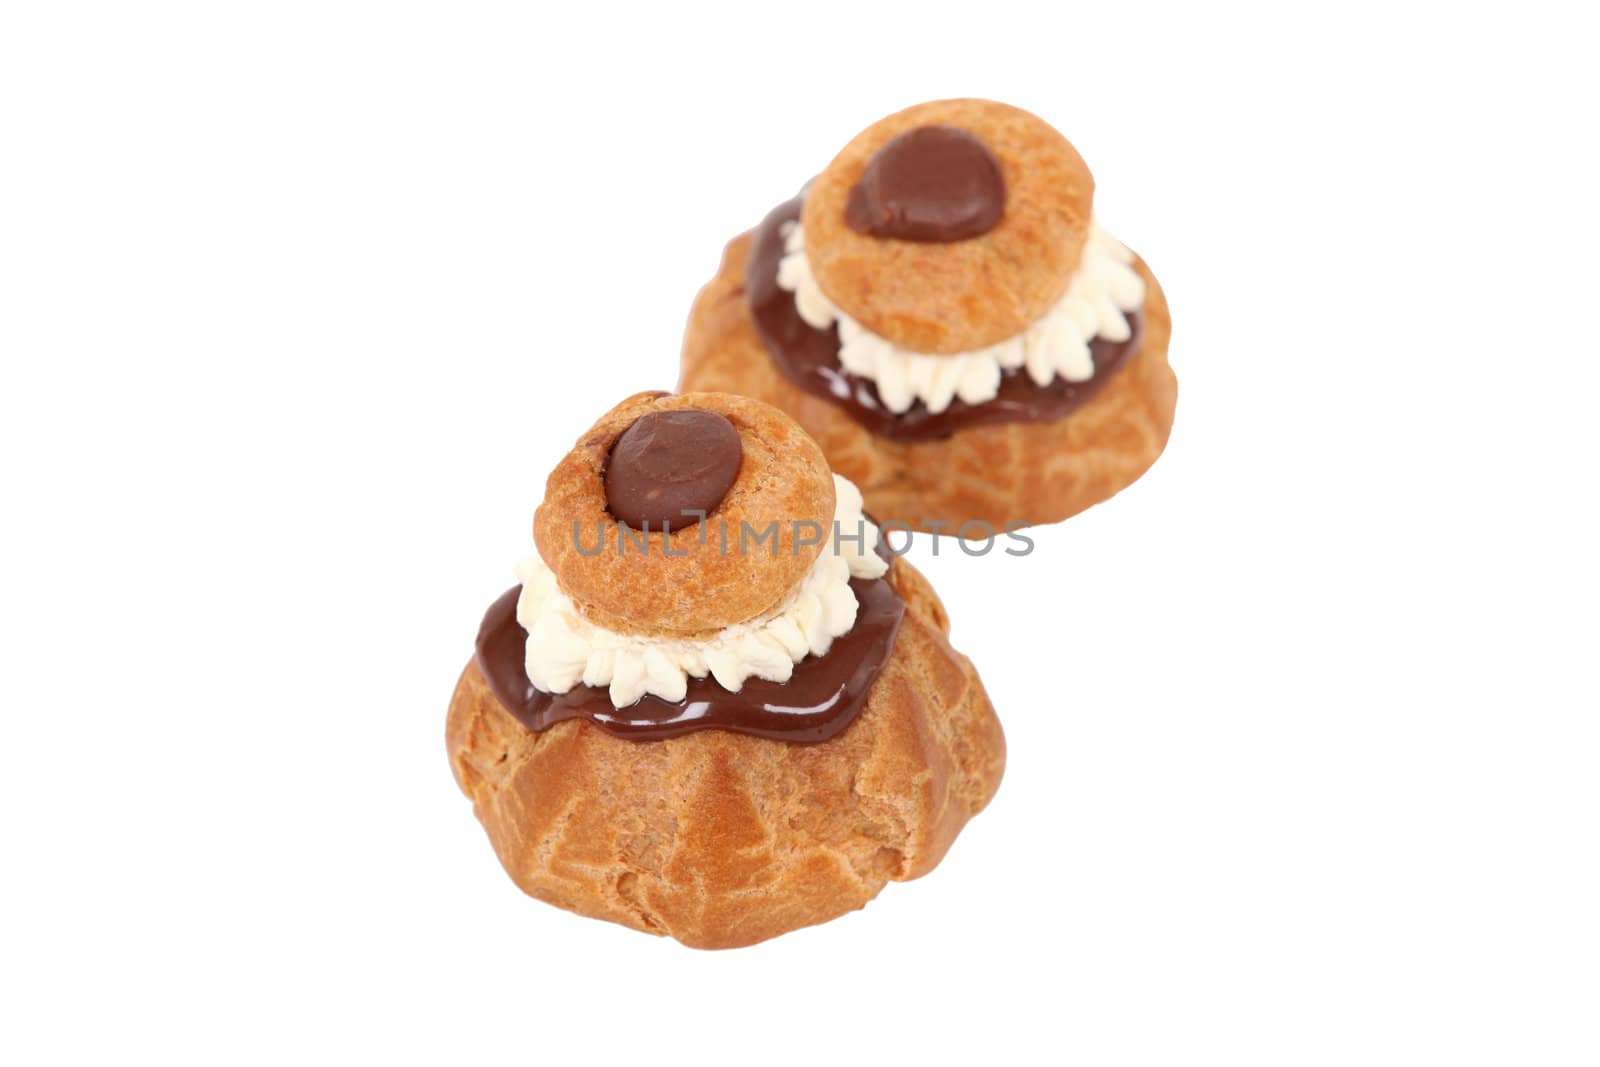 Cream puffs isolated on white background by phovoir